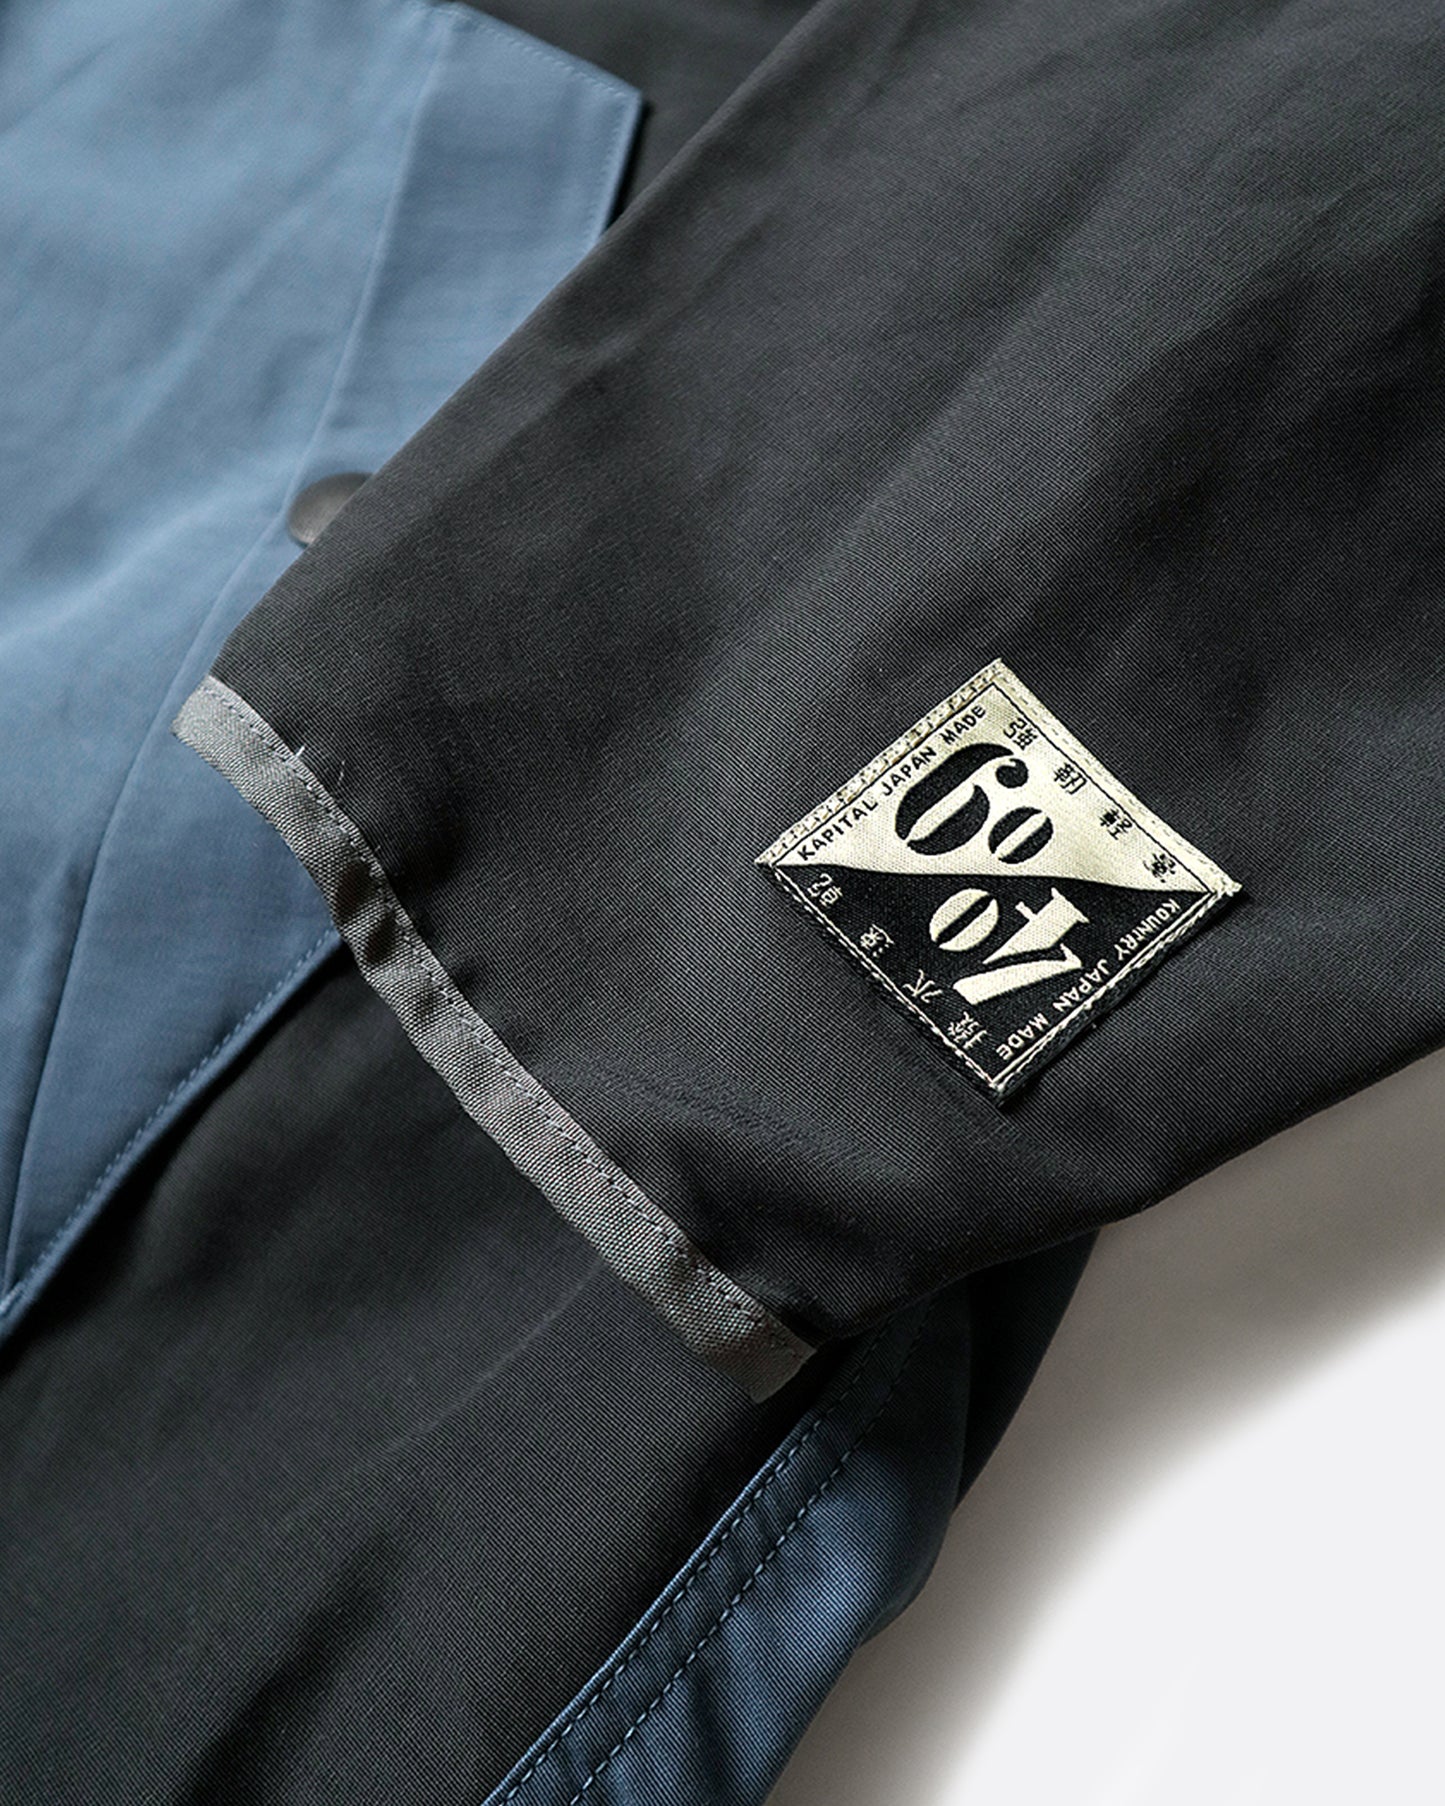 A close up on the gray sleeve of the 60/40 two-tone anorak.